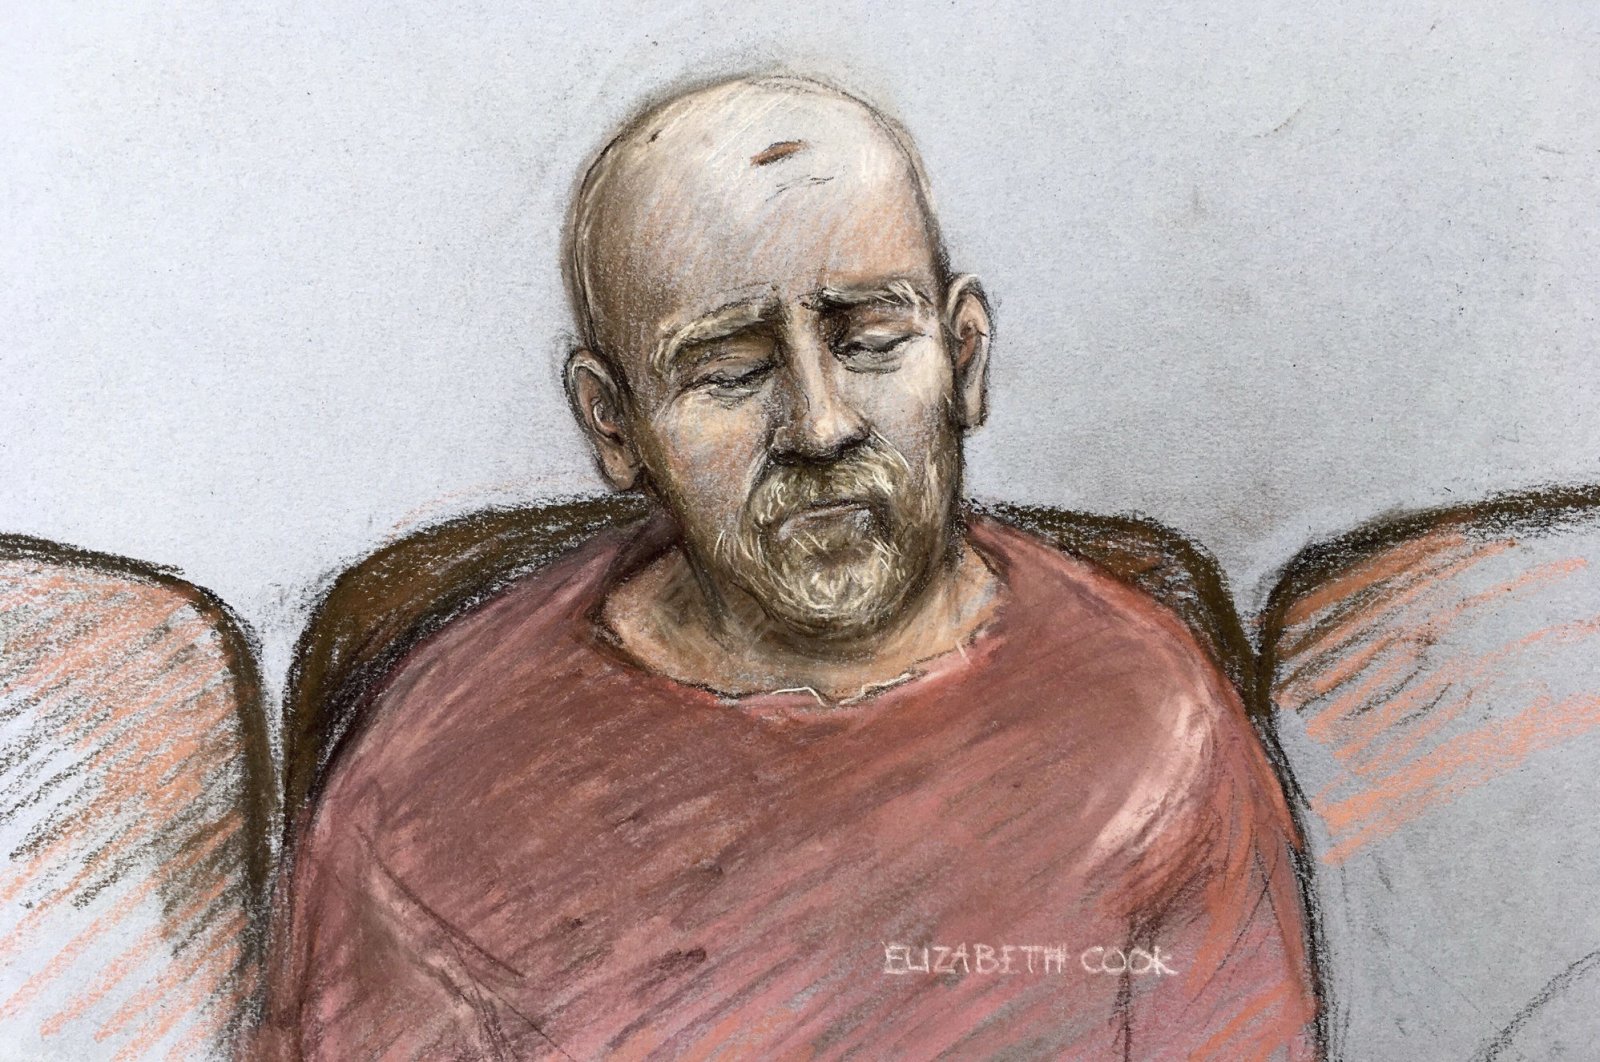 Court artist sketch by Elizabeth Cook, showing serving police constable Wayne Couzens, making his first appearance at the Old Bailey court by video link from Belmarsh top security jail where he is charged with the murder and kidnapping of Sarah Everard in south London, Tuesday March 16, 2021, . (AP Photo)